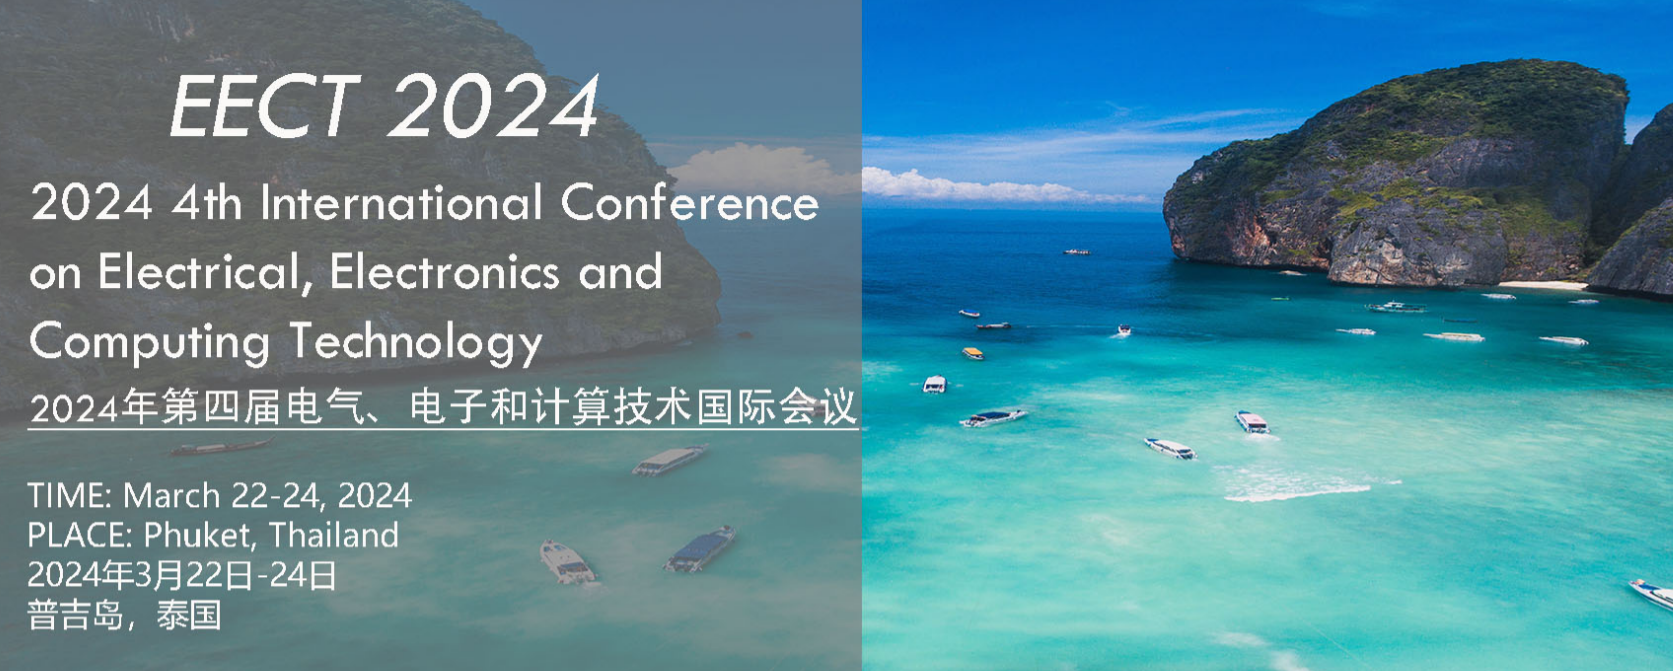 2024 4th International Conference on Electrical, Electronics and Computing Technology (EECT 2024) -EI Compendex, Phuket, Thailand